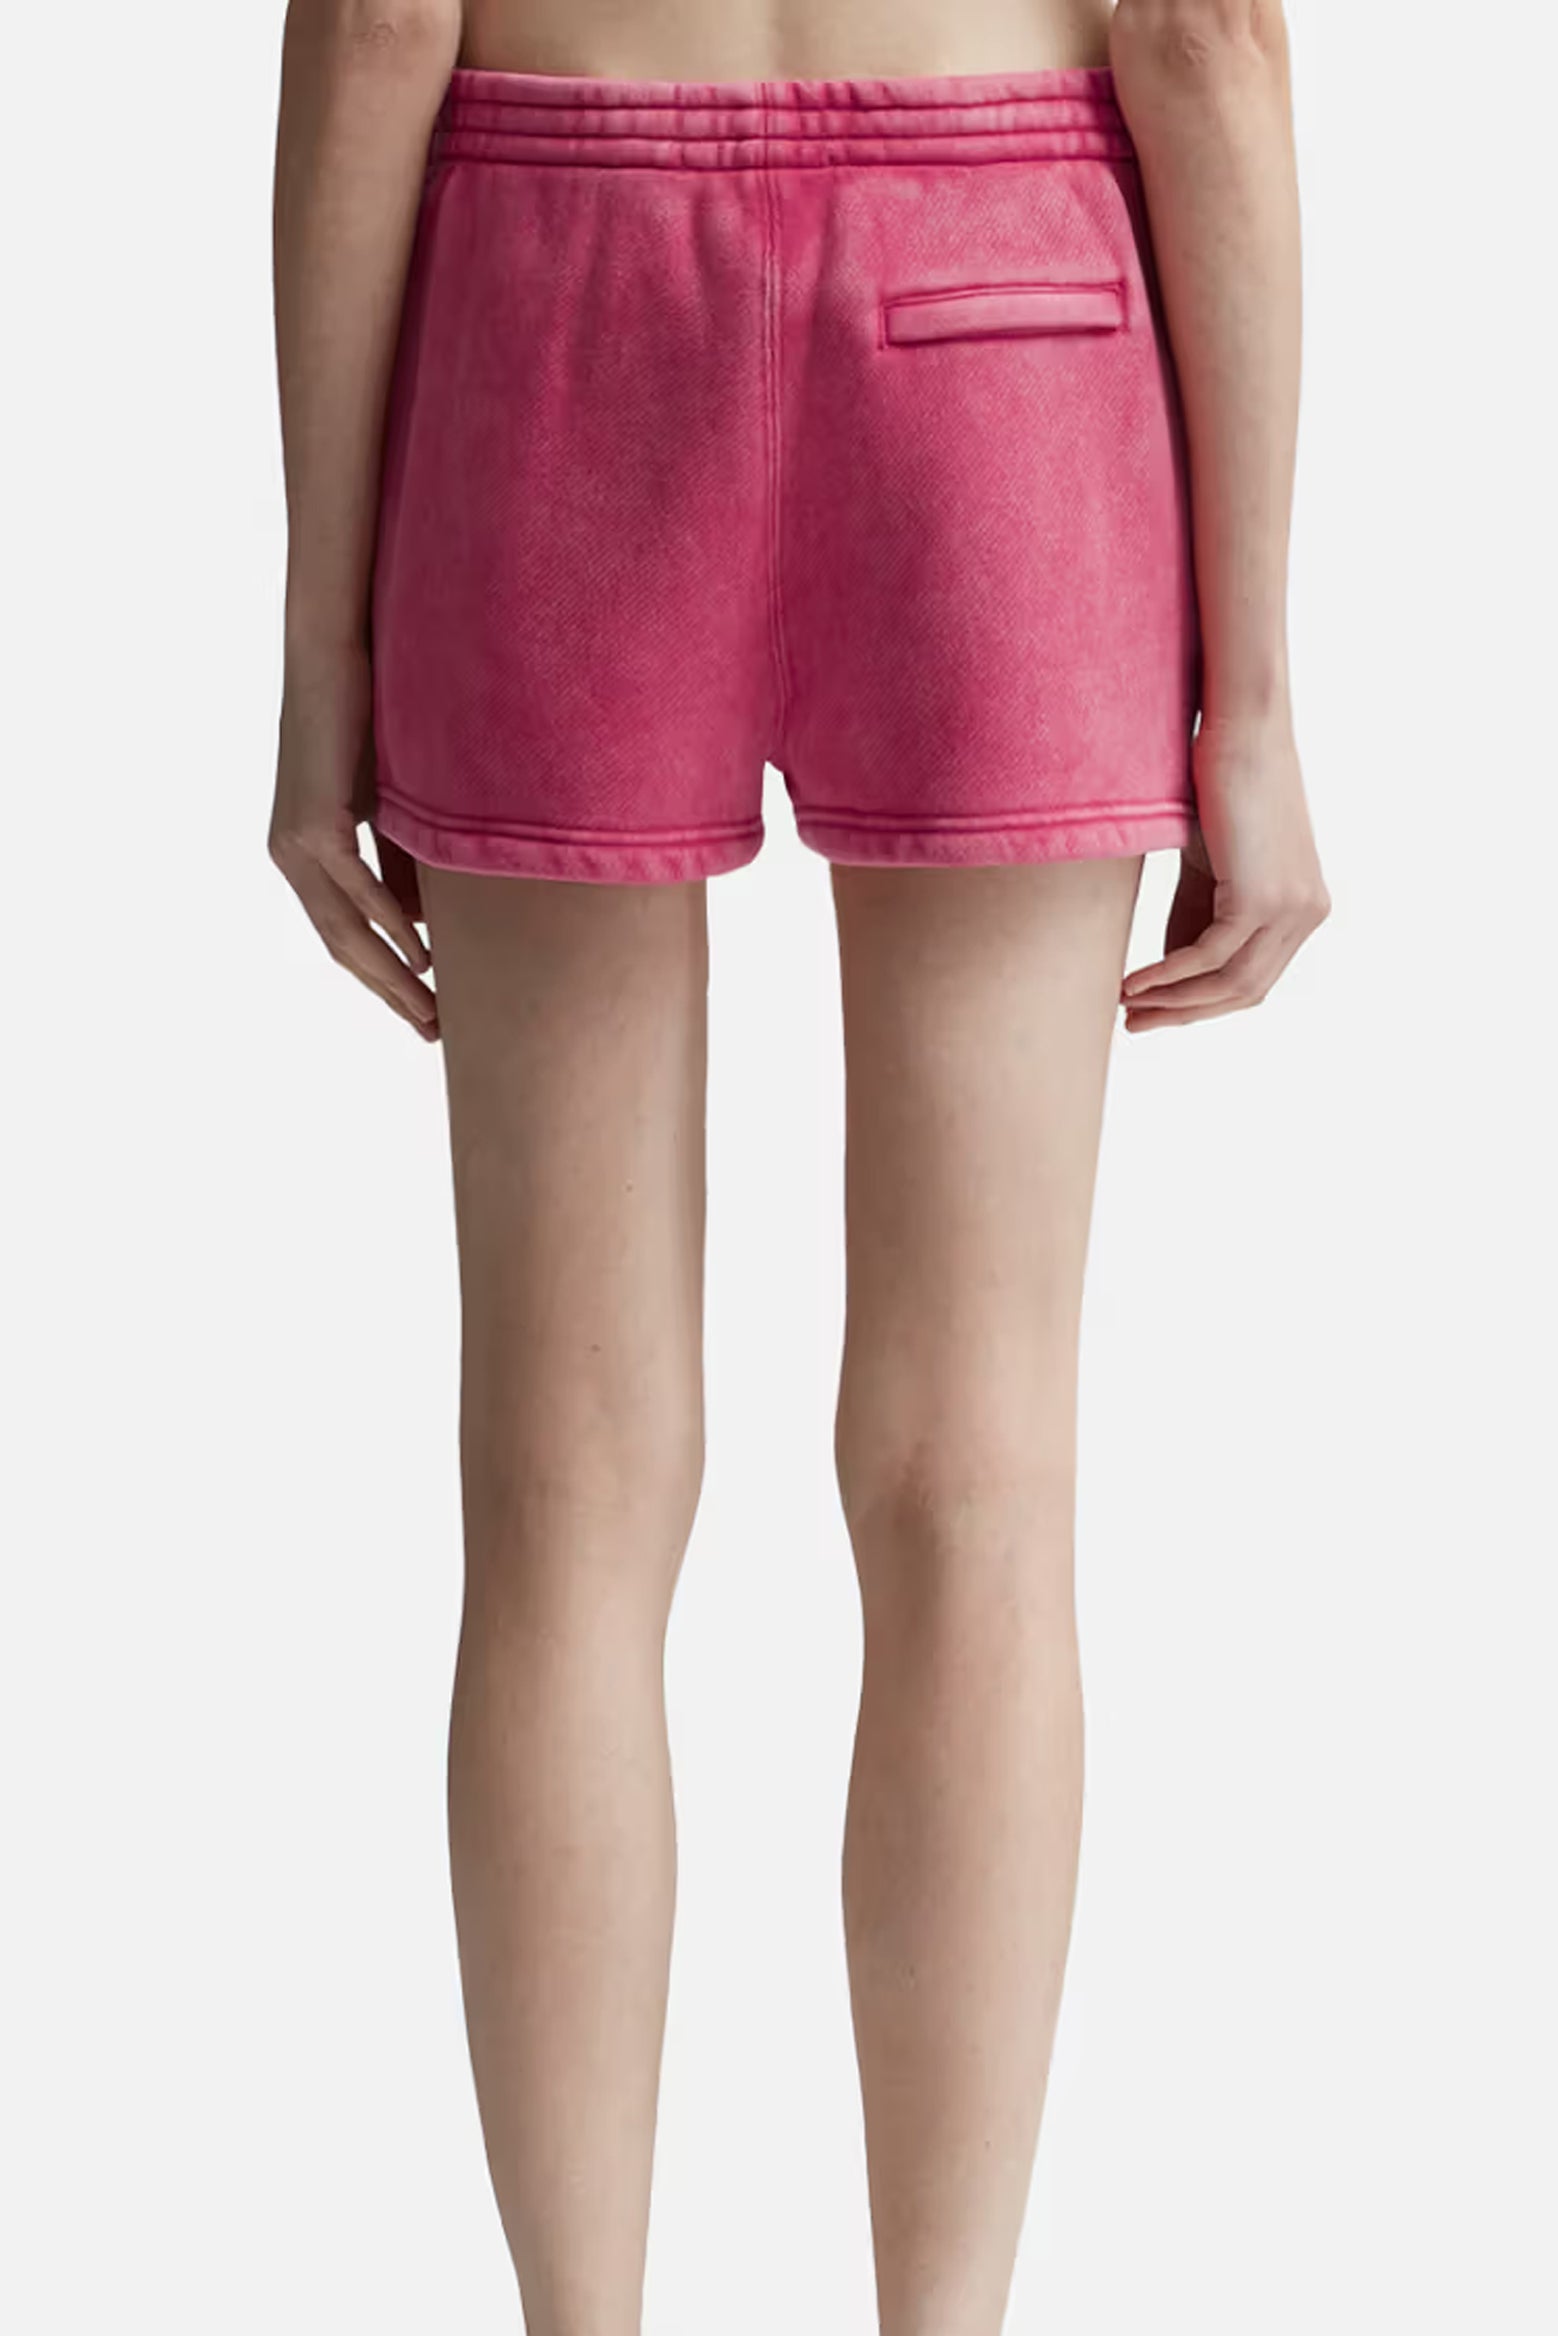 The Alexander Wang Essential Terry Sweatshort in Soft Cherry available at The New Trend Australia